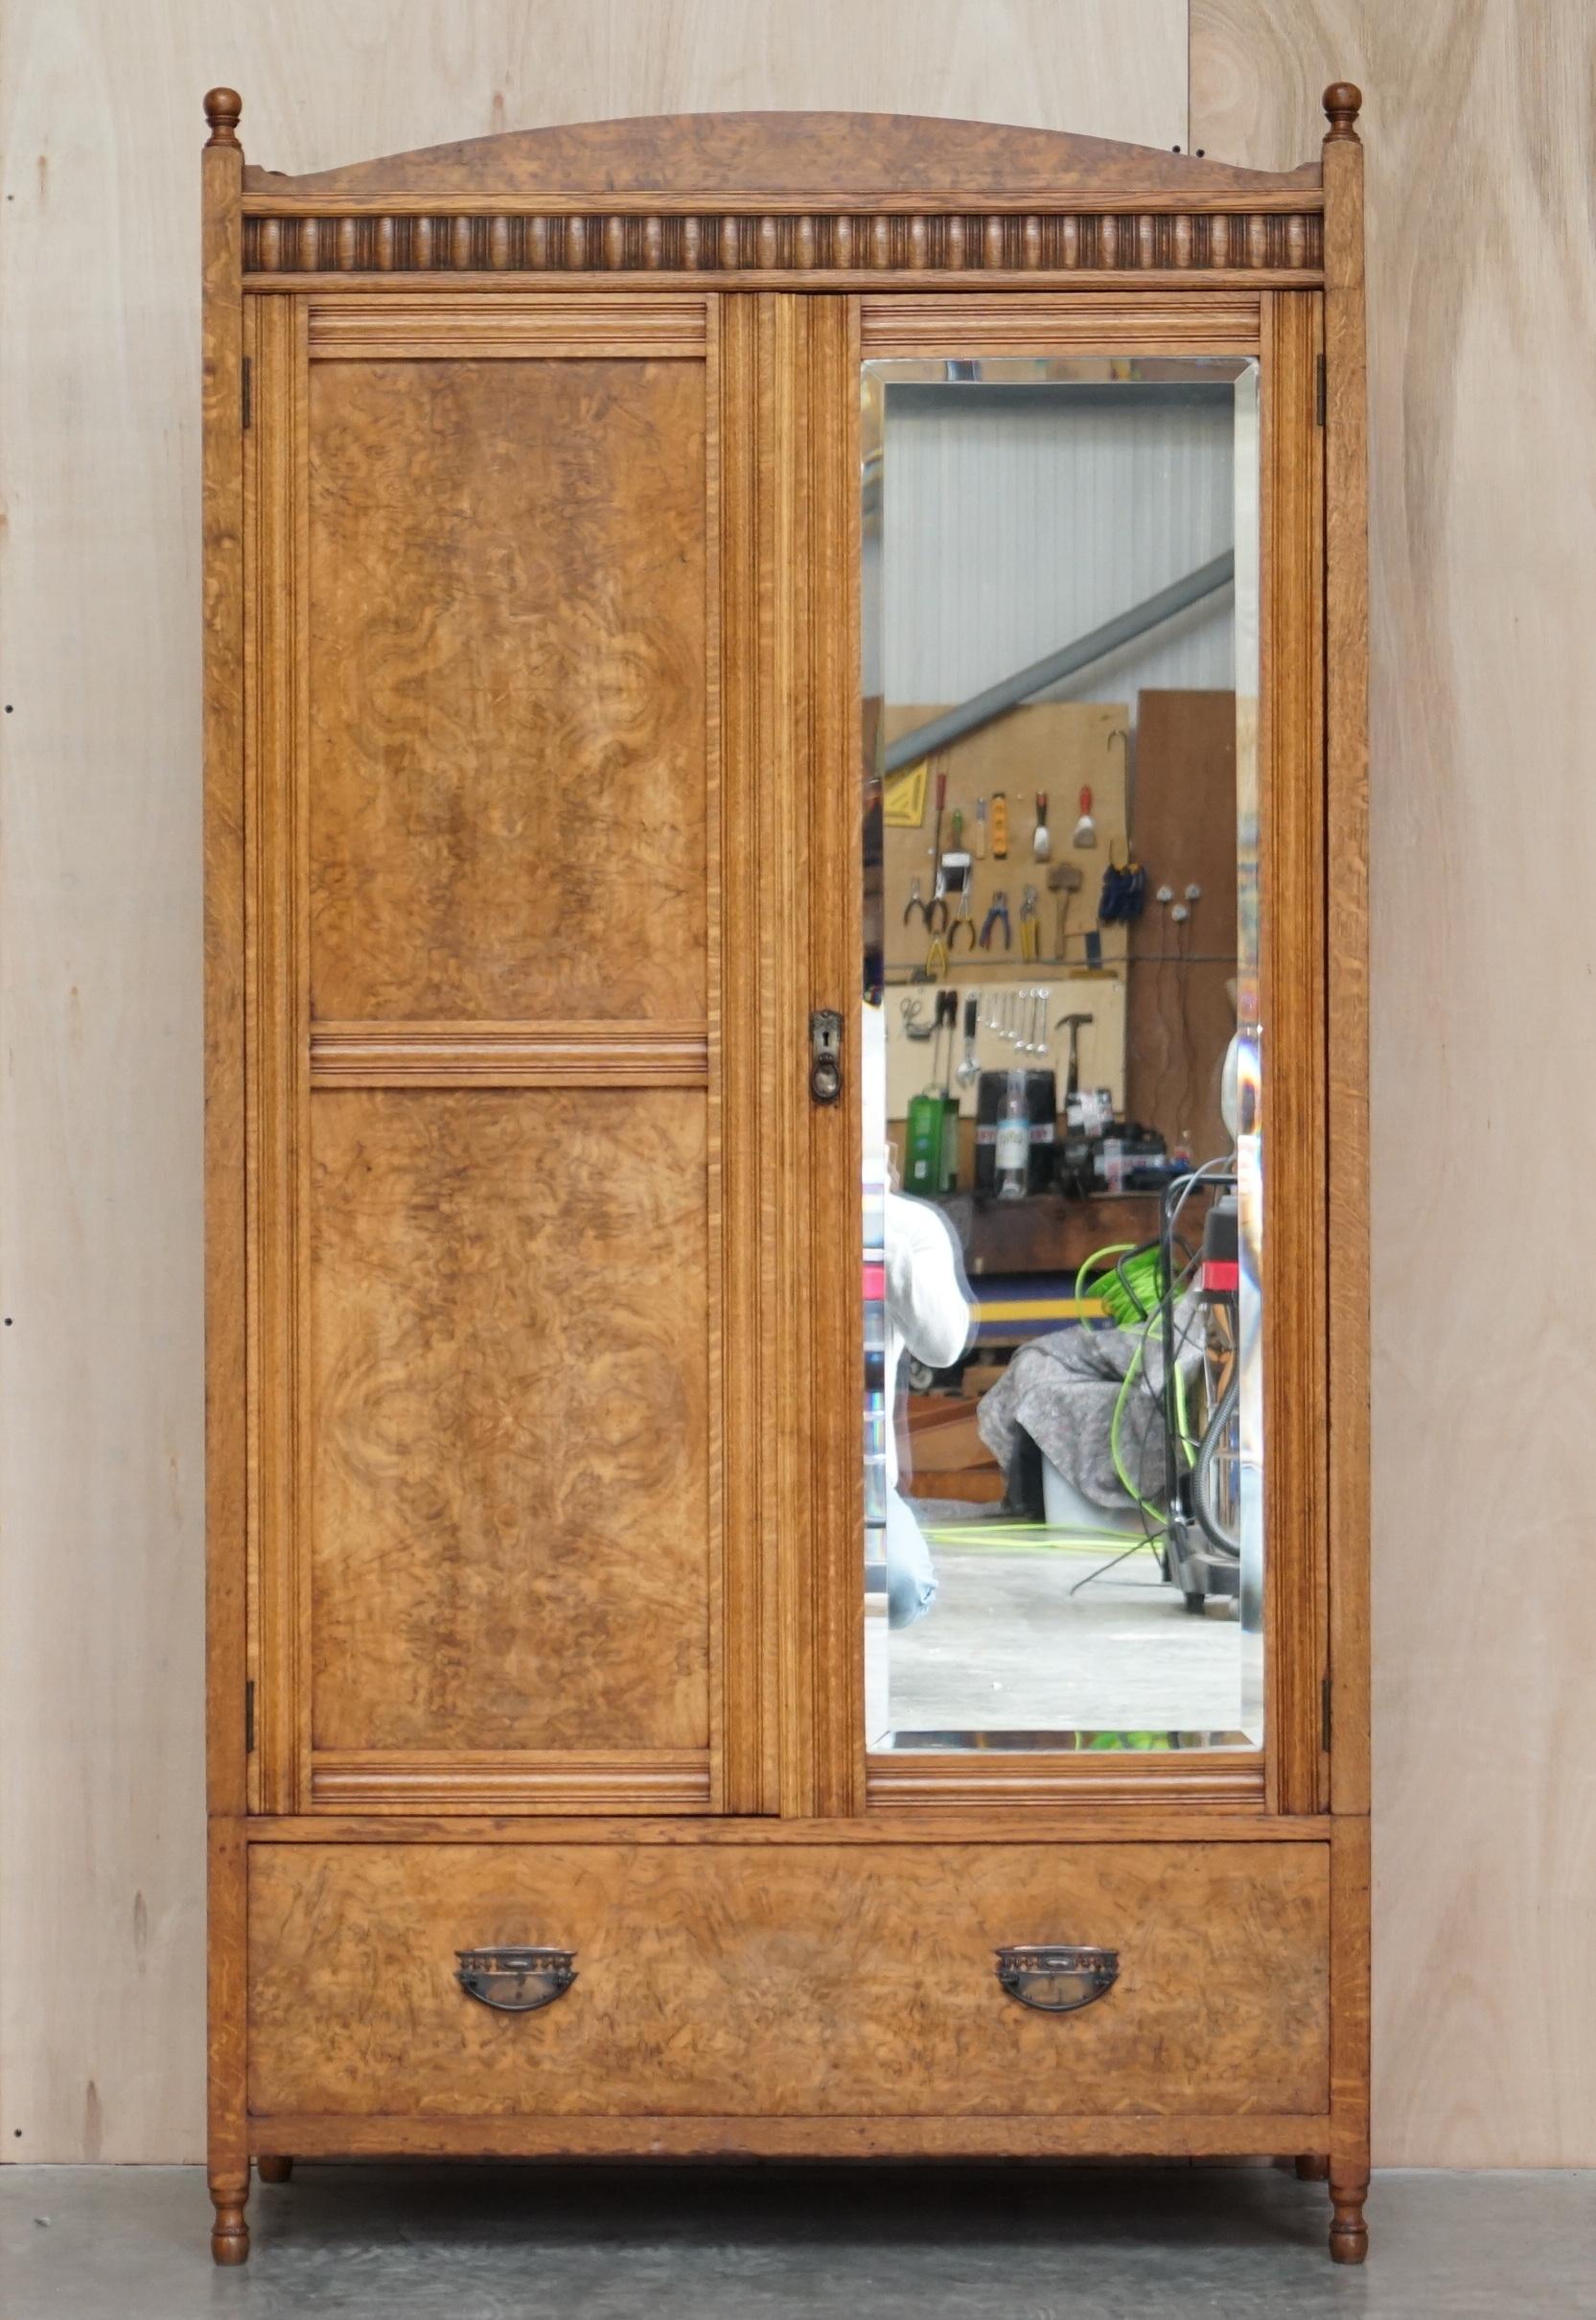 We are delighted to offer this very fine late Victorian Pollard Oak wardrobe with glass front door and large single drawer

A very good looking well made and decorative piece. I’ve not seen another in Pollard Oak before, it is one of my favourite